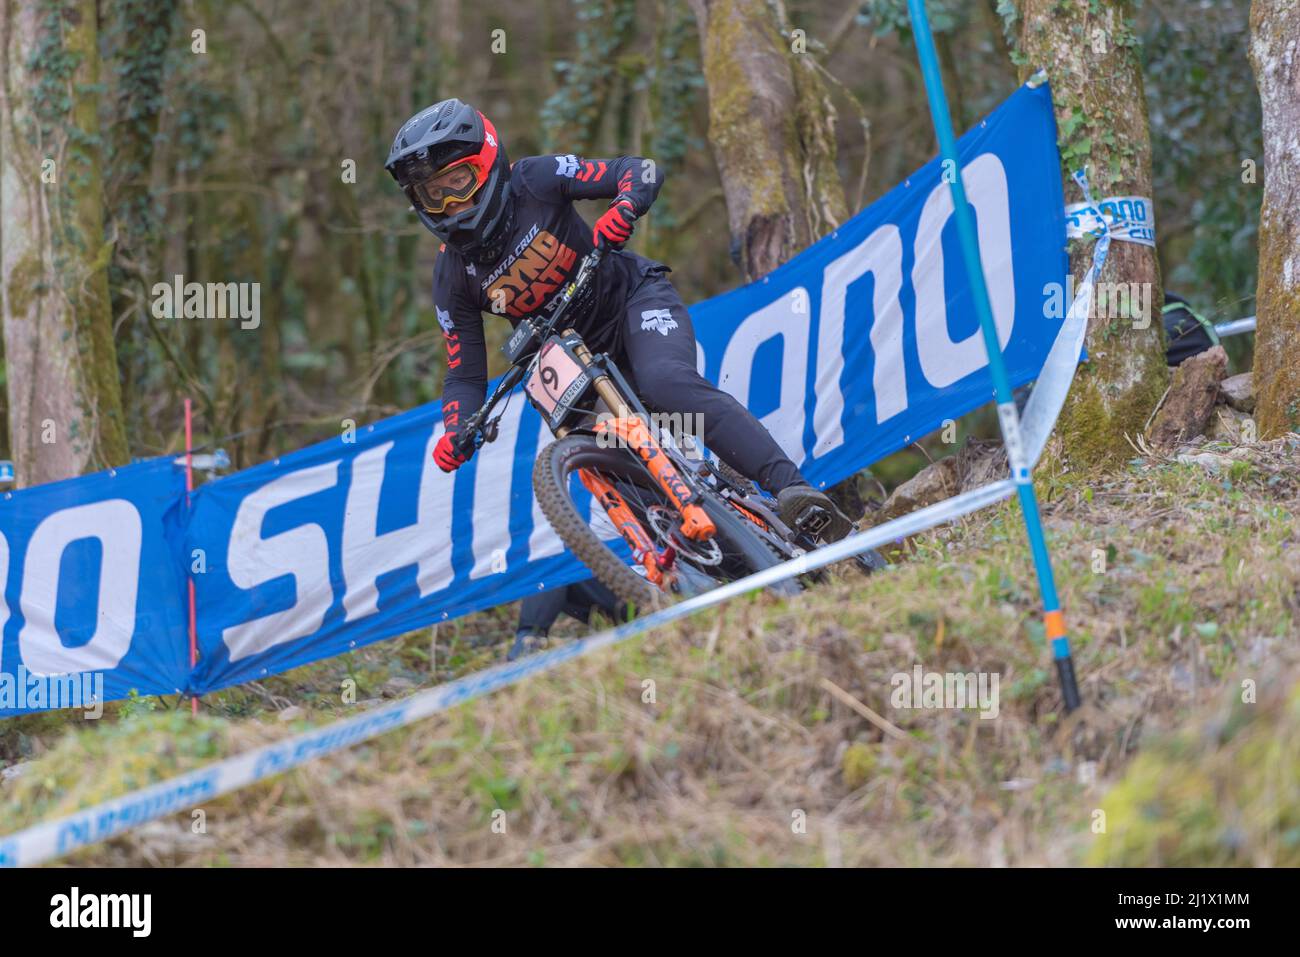 Lourdes, France : 2022 March 27 : MONIKA HRASTNIK SLO competes during the UCI Mountain Bike Downhill World Cup 2022 race at the Lourdes, France. Stock Photo